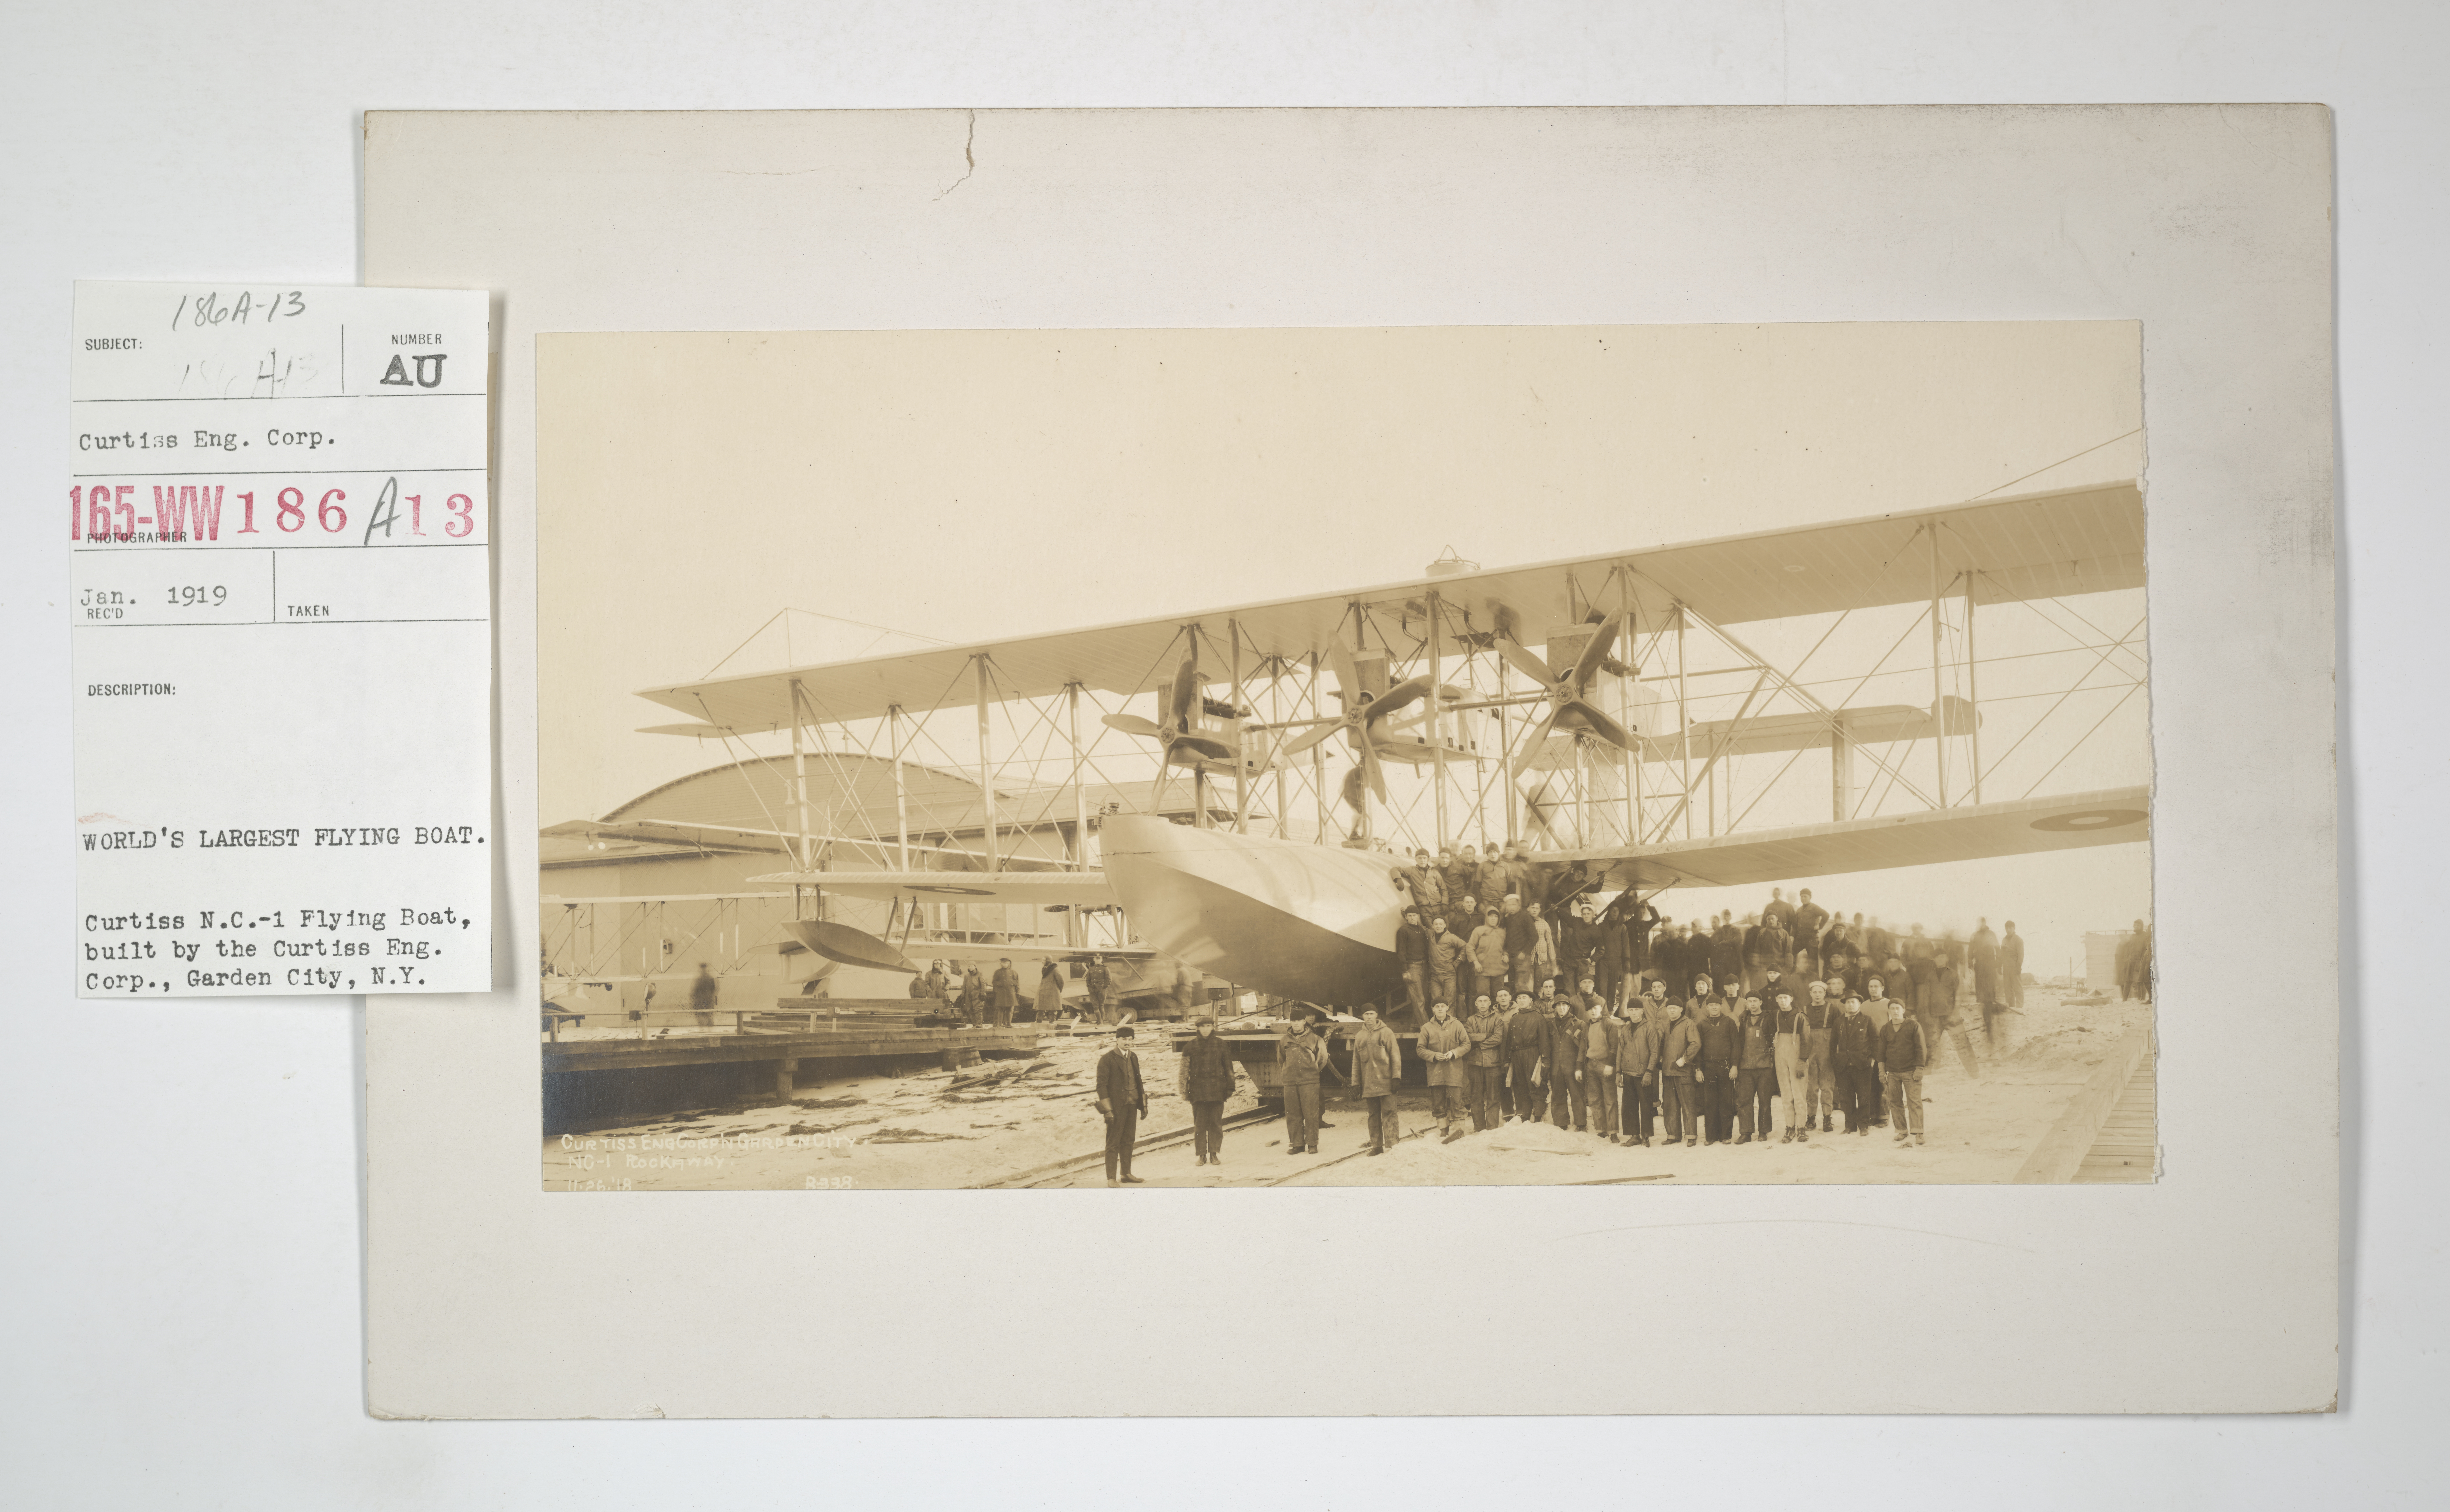 File Hydroplanes Types Curtiss World S Largest Flying Boat